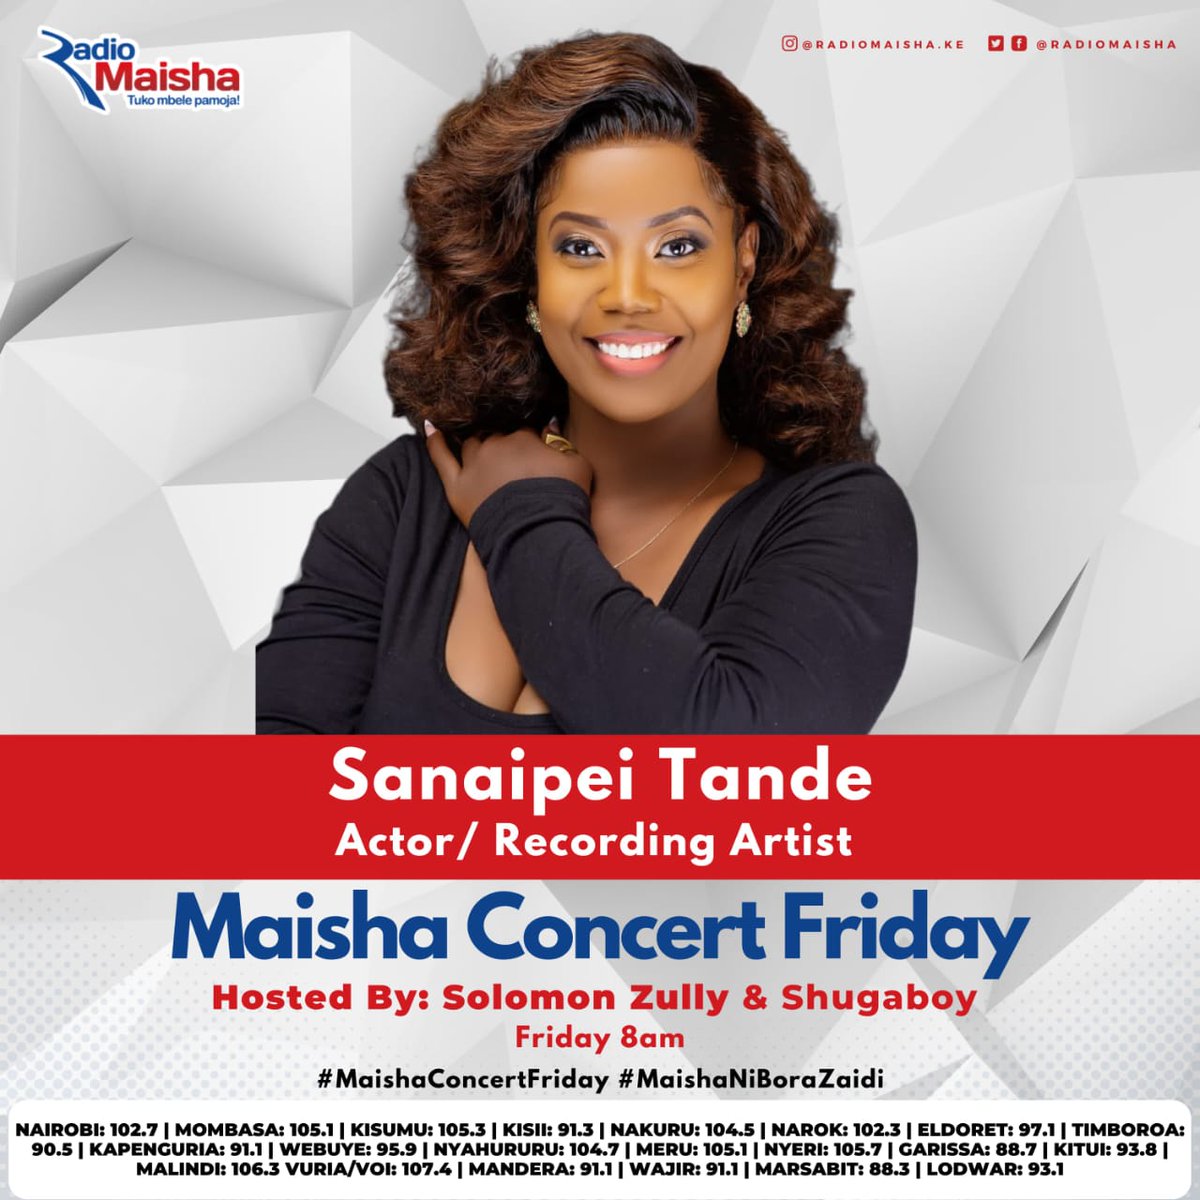 We are on #MaishaConcertfriday with the beautiful @Sanaipei_Tande